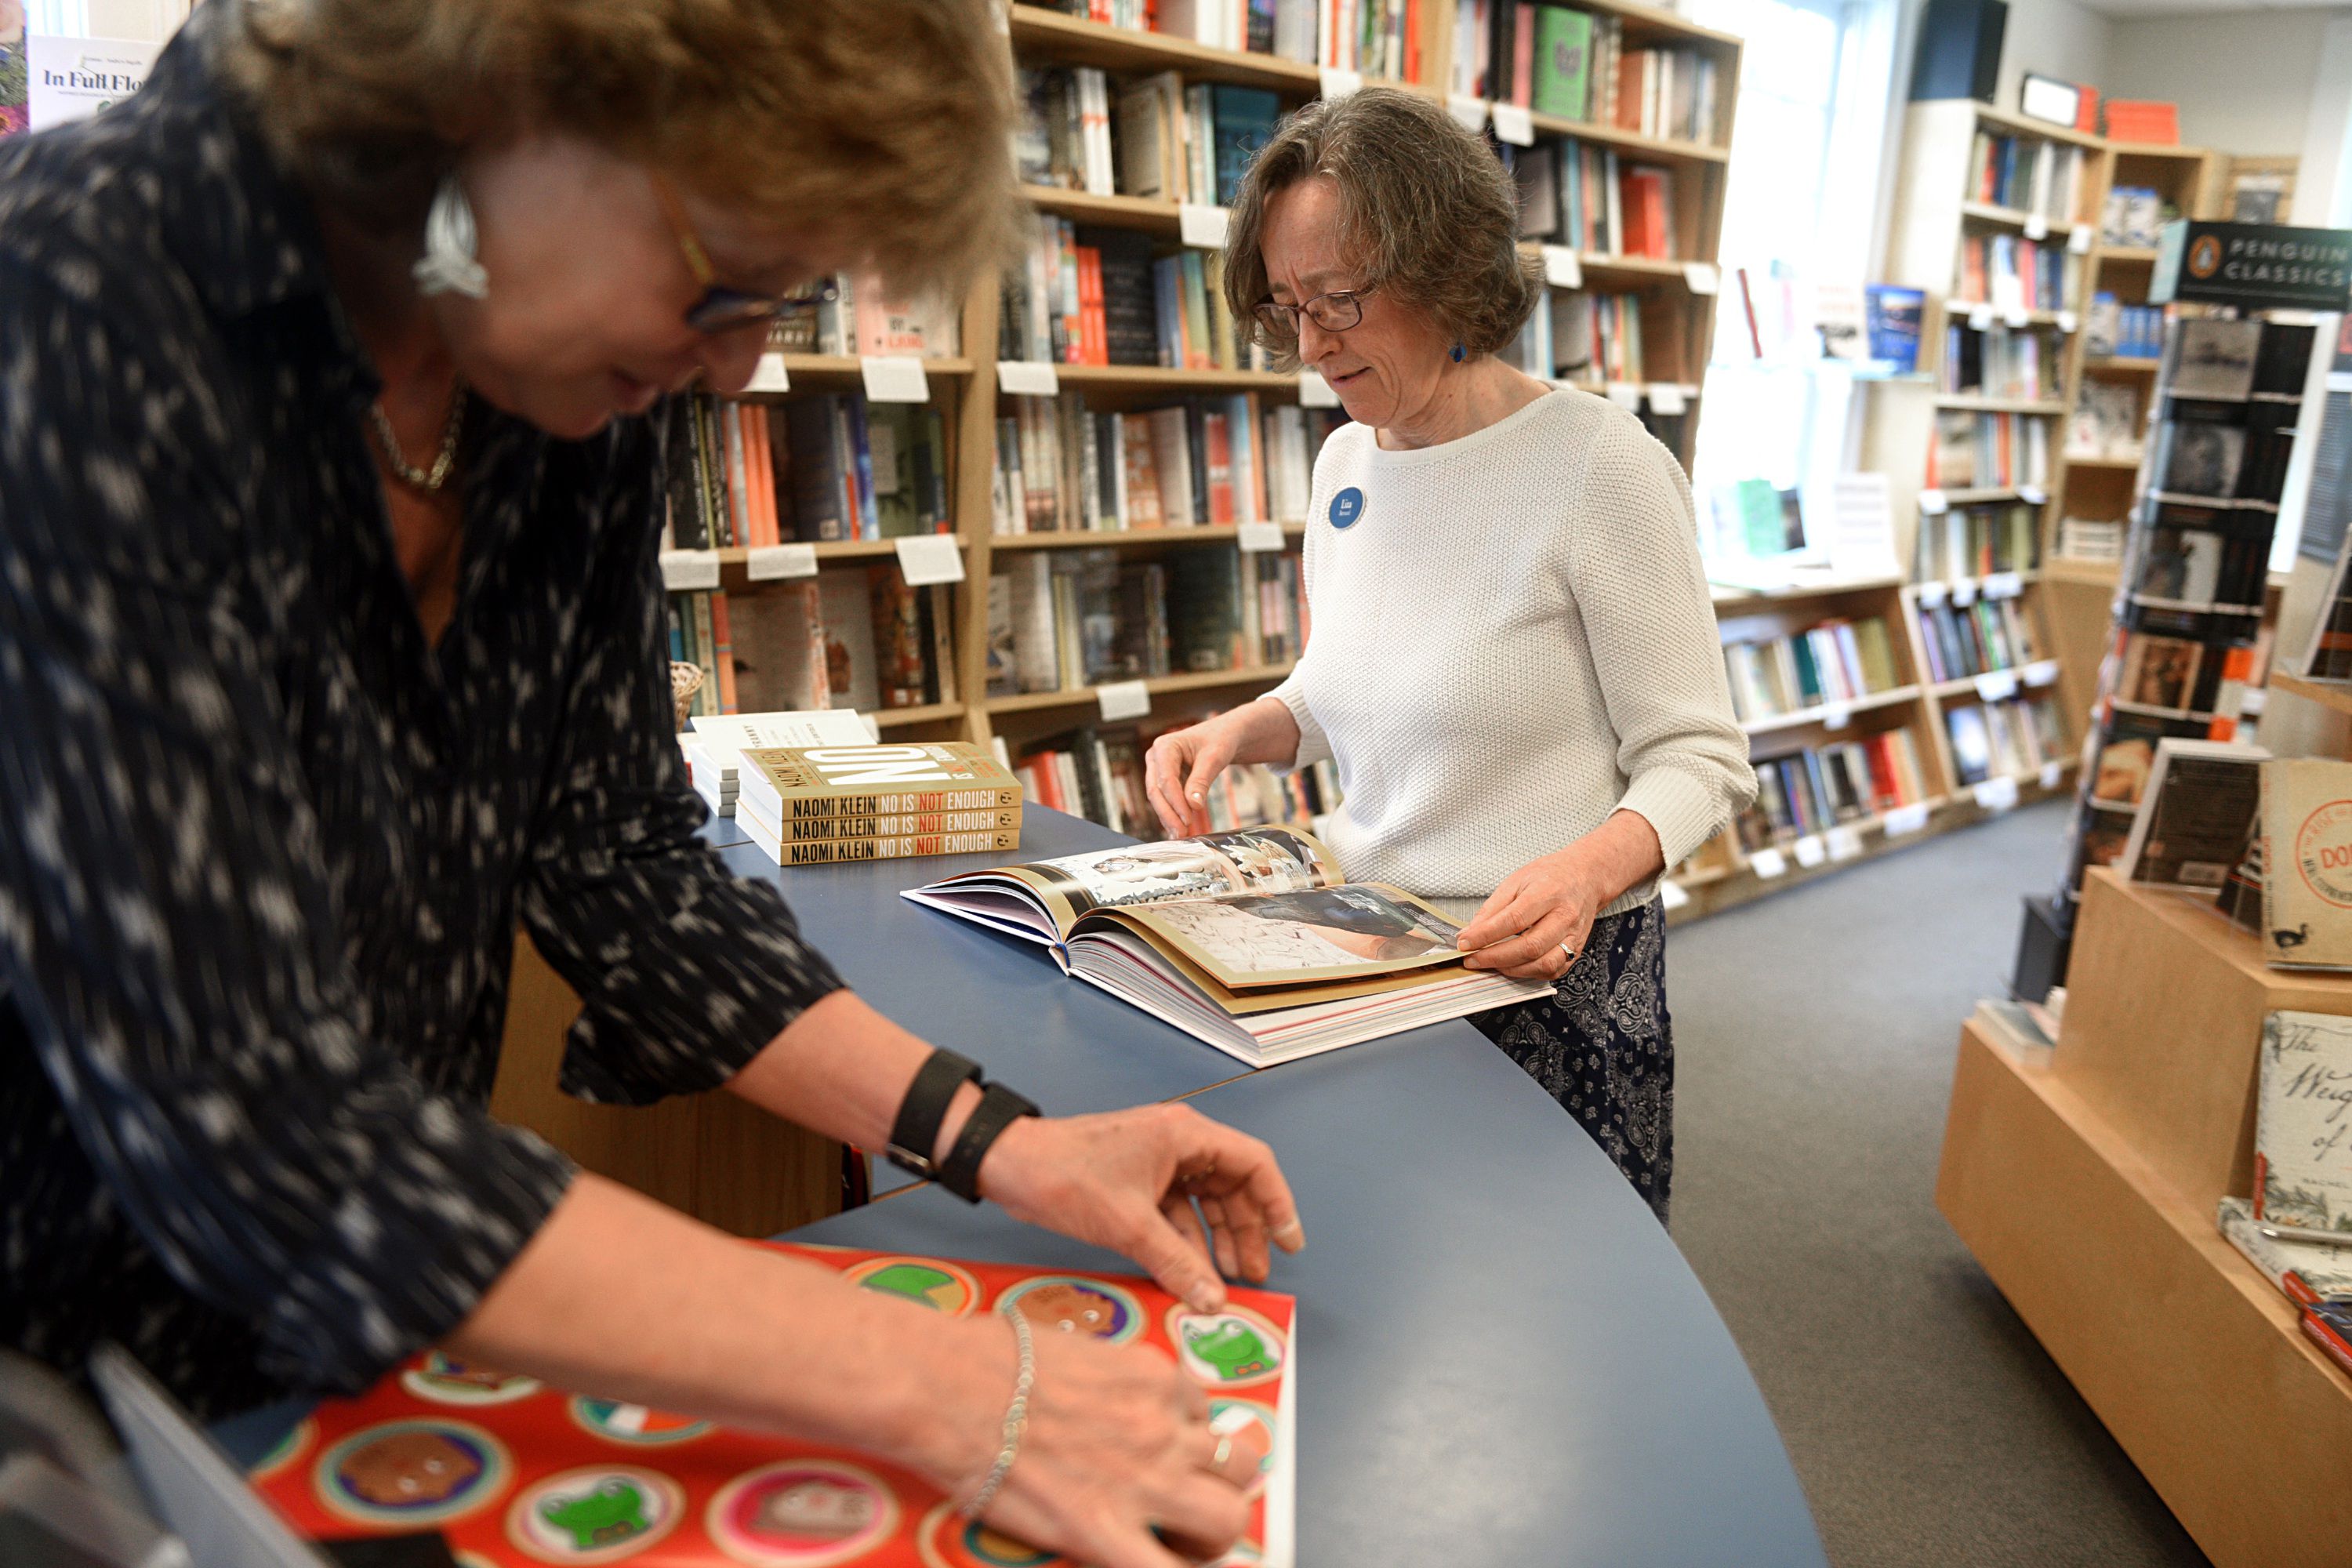 Carin Pratt, left, wraps a gift for a customer as Liza Bernard pages through a book at the Norwich Bookstore on June 13, 2017, in Norwich, Vt. (Valley News - Jennifer Hauck) Copyright Valley News. May not be reprinted or used online without permission. Send requests to permission@vnews.com.